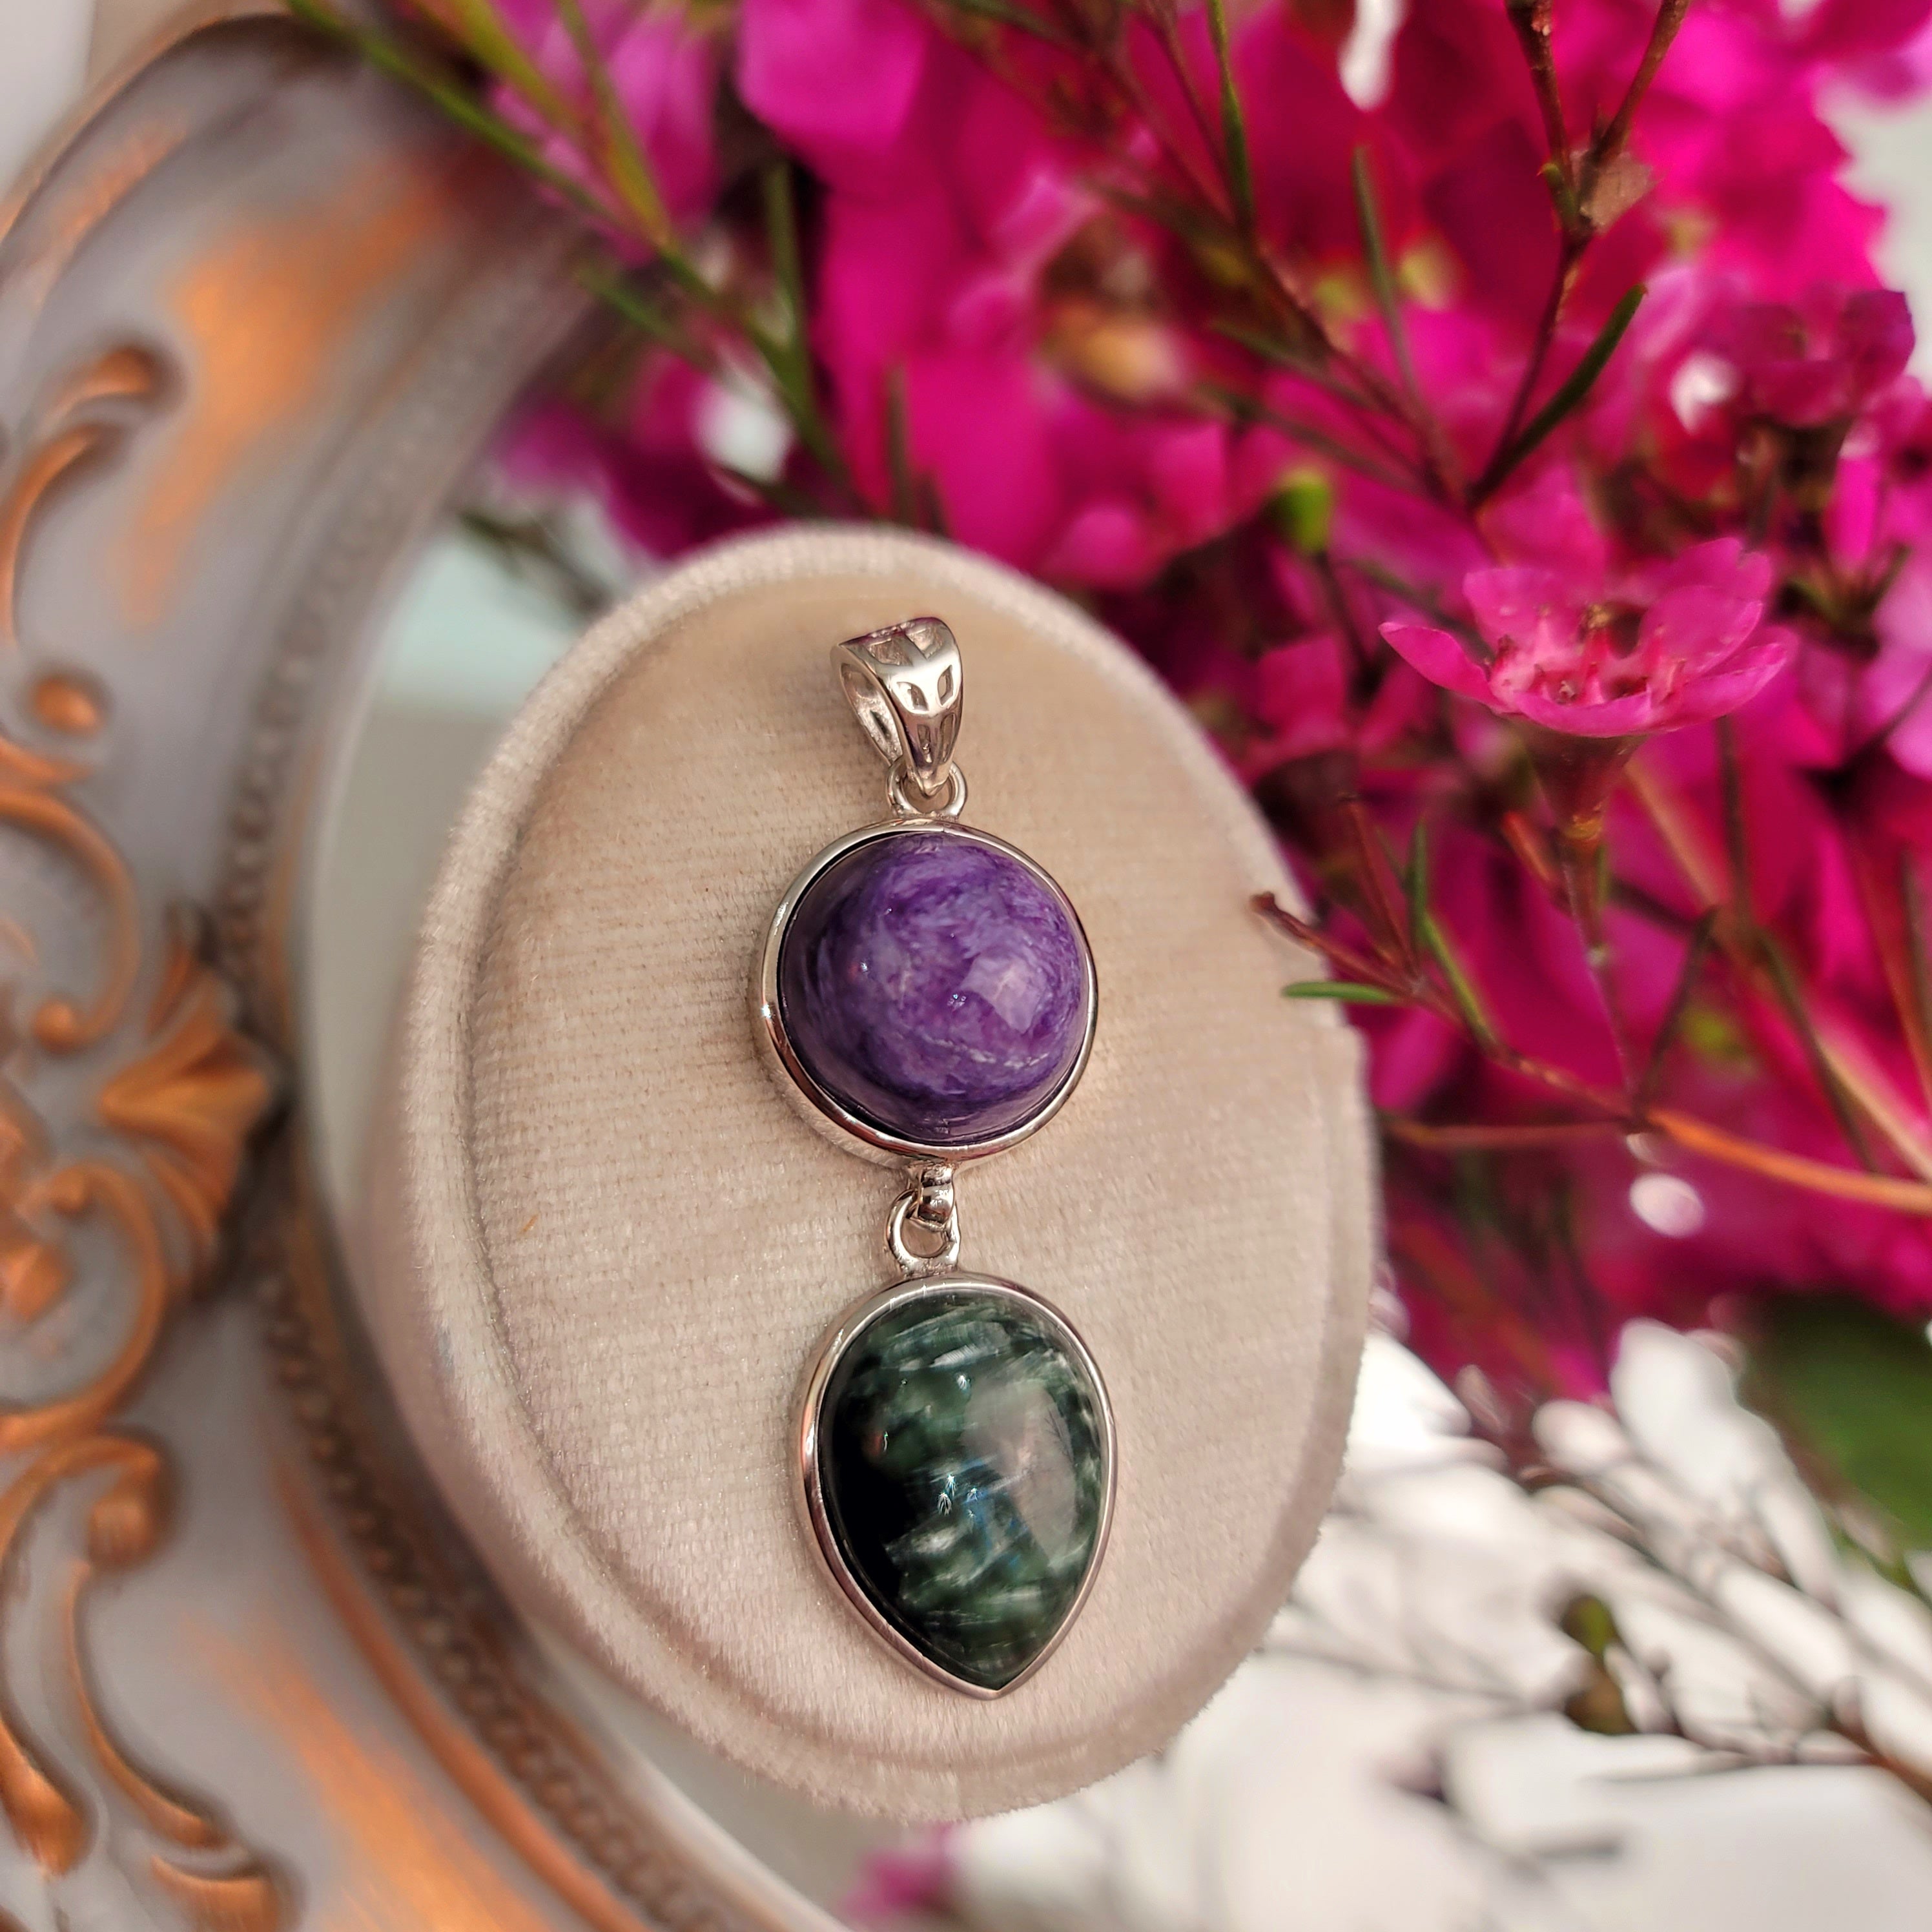 Charoite x Seraphinite Pendant for Connection with the Divine Source and your Higher Self